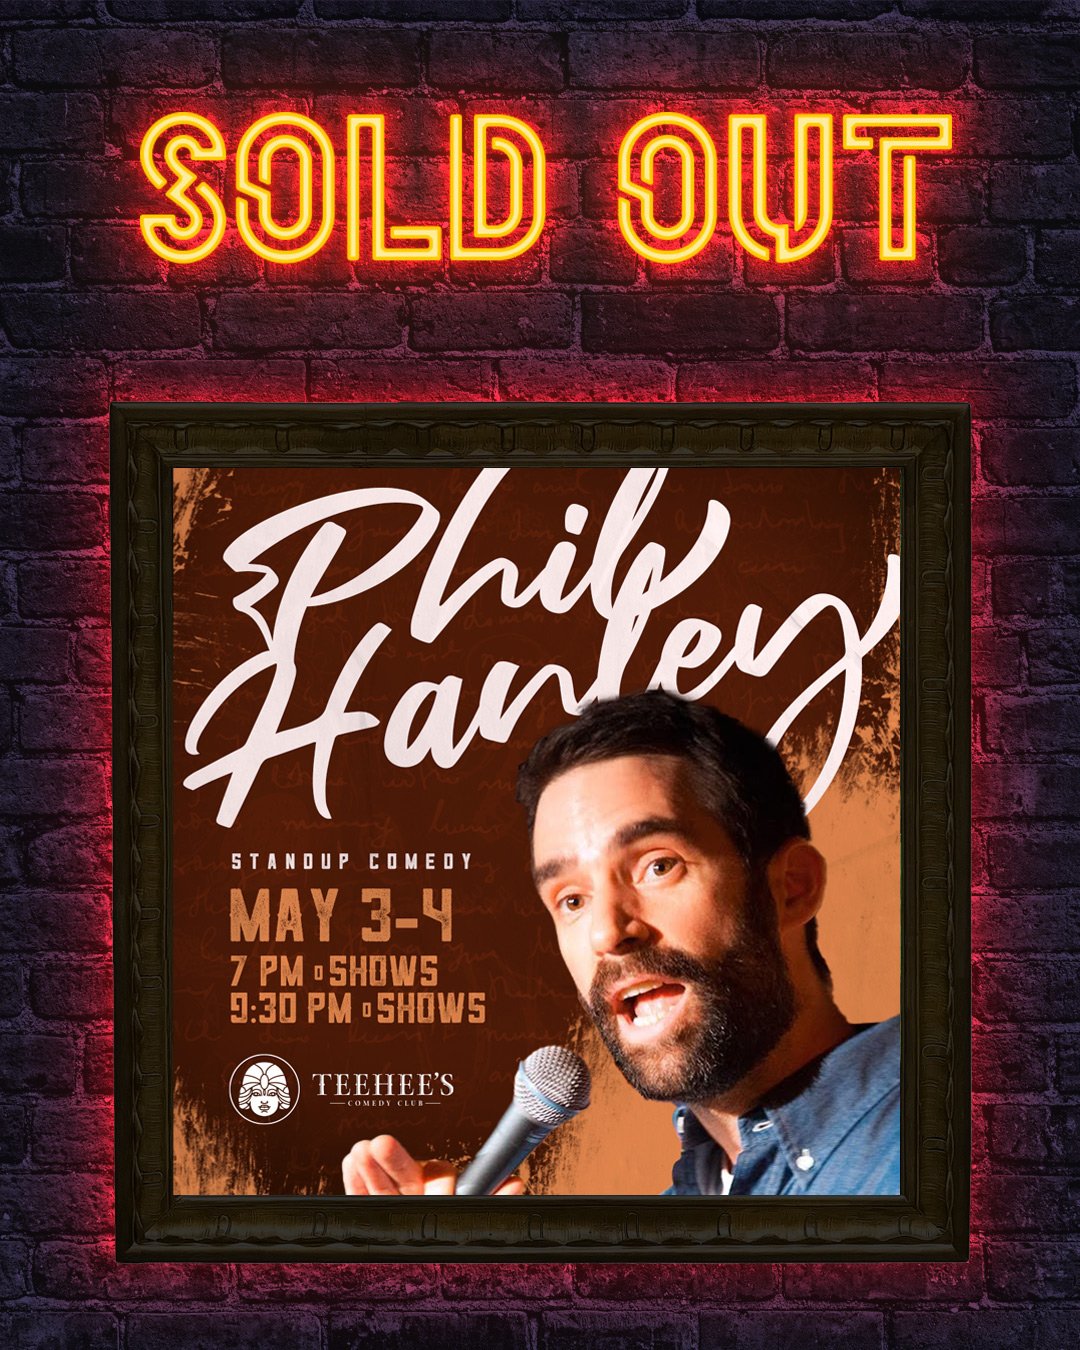 🔥🎤🎟 All Phil Hanley shows except for the 9:30pm Friday show are sold out of advance tickets!
Limited seating on stools at the bar and in the back of the club will be sold at the door.
Get the final 9:30pm Friday tickets at teeheescomedy.com/shows